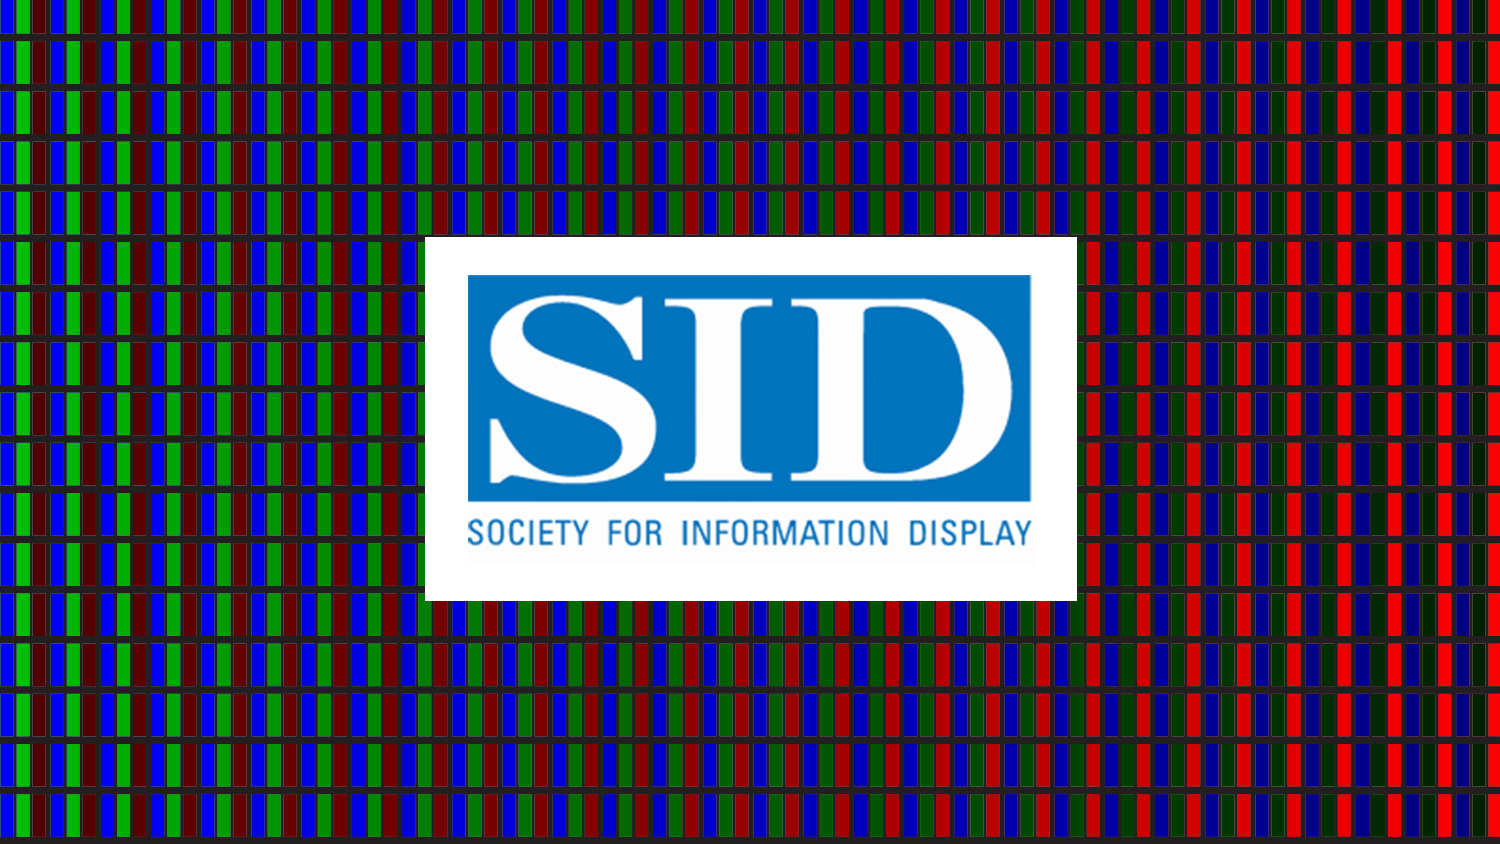 Image shows logo for SID, the Society for Information Display. The logo is white and blue and is surrounded by a background of multi-color repeating vertical rectangles in red, blue and black.